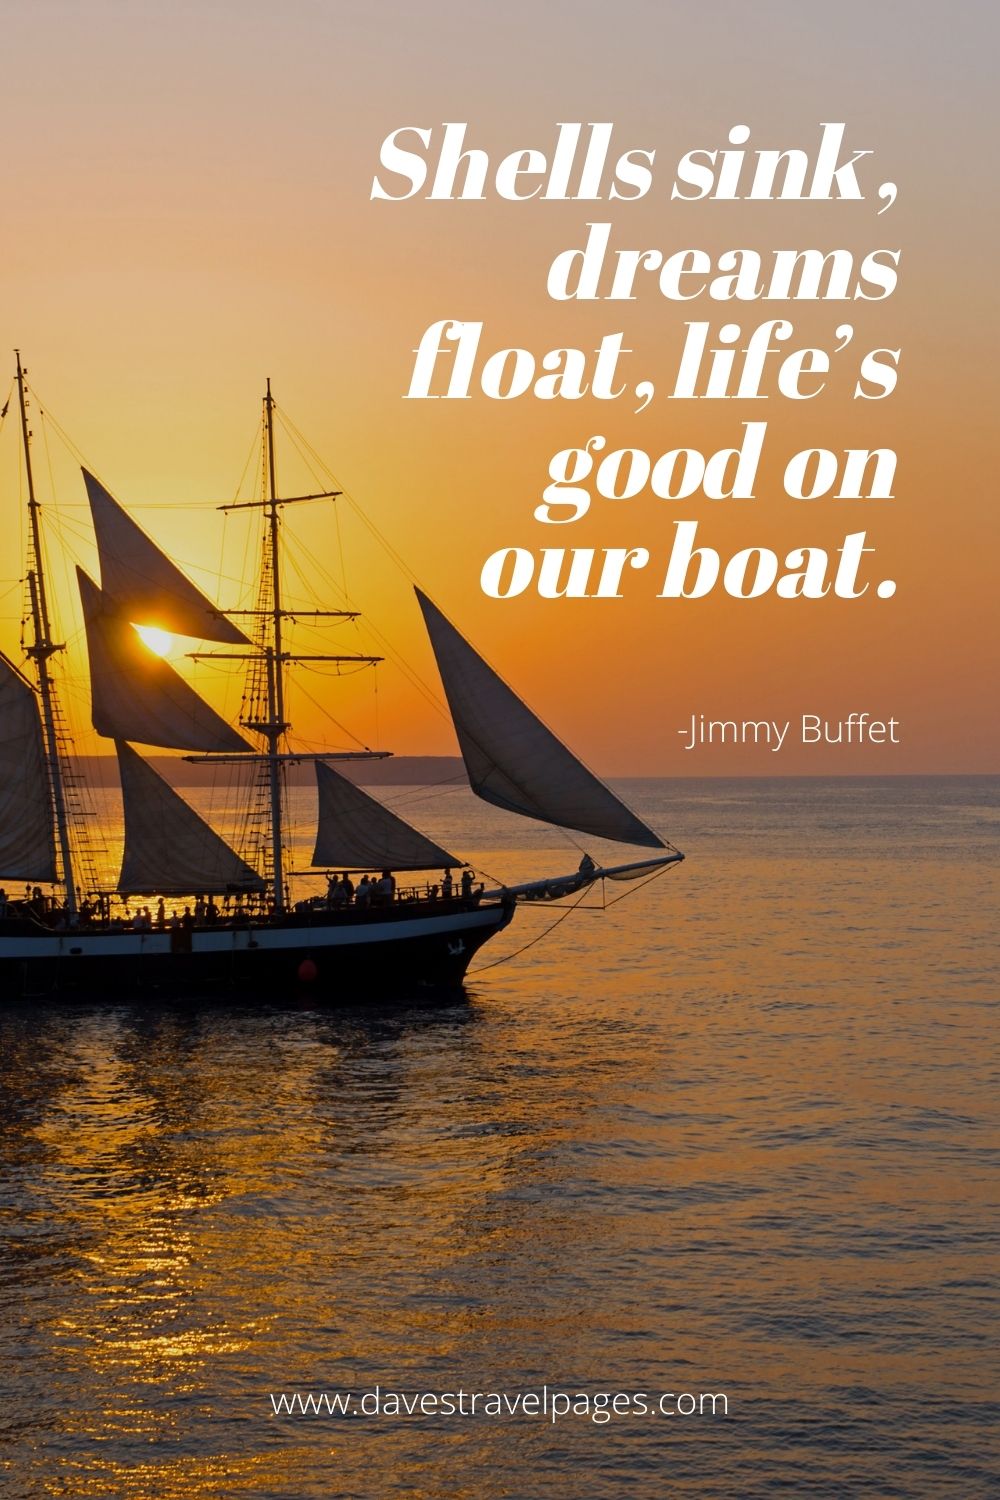 Shells sink, dreams float. Life’s good on our boat.